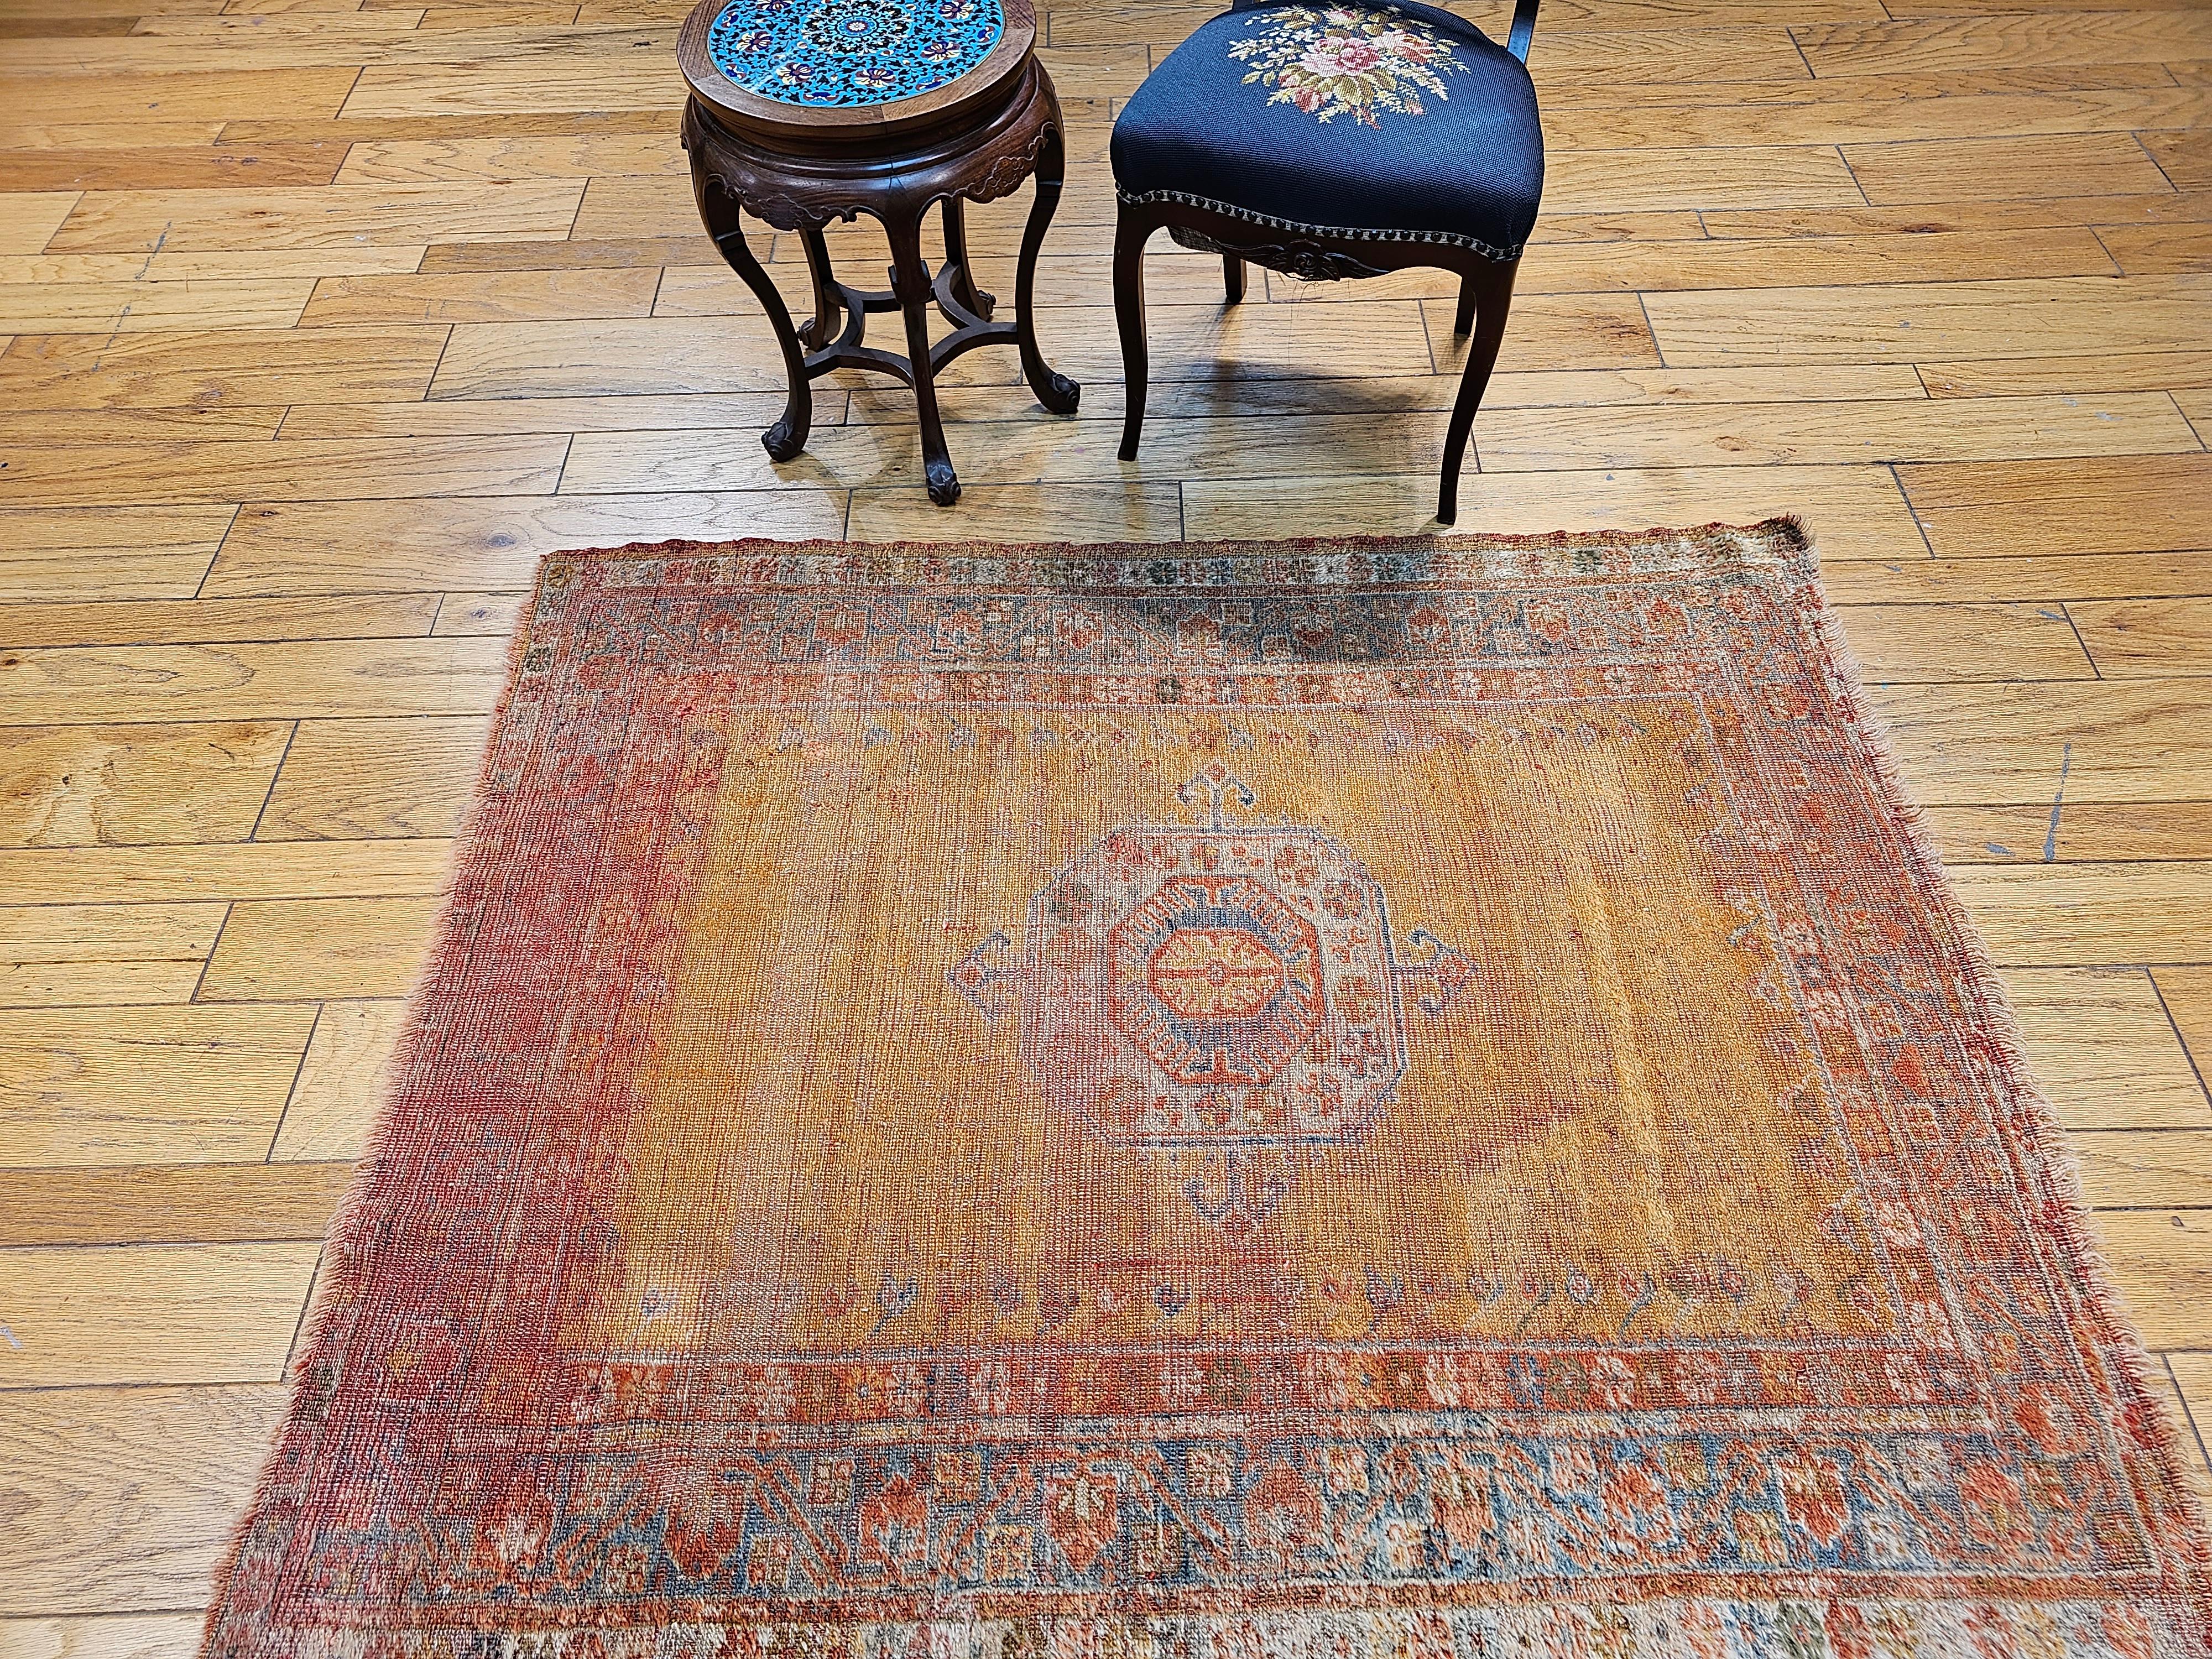 Late 19th Century Turkish Oushak Area Rug in Mamluk Pattern in Saffron, Teal For Sale 11